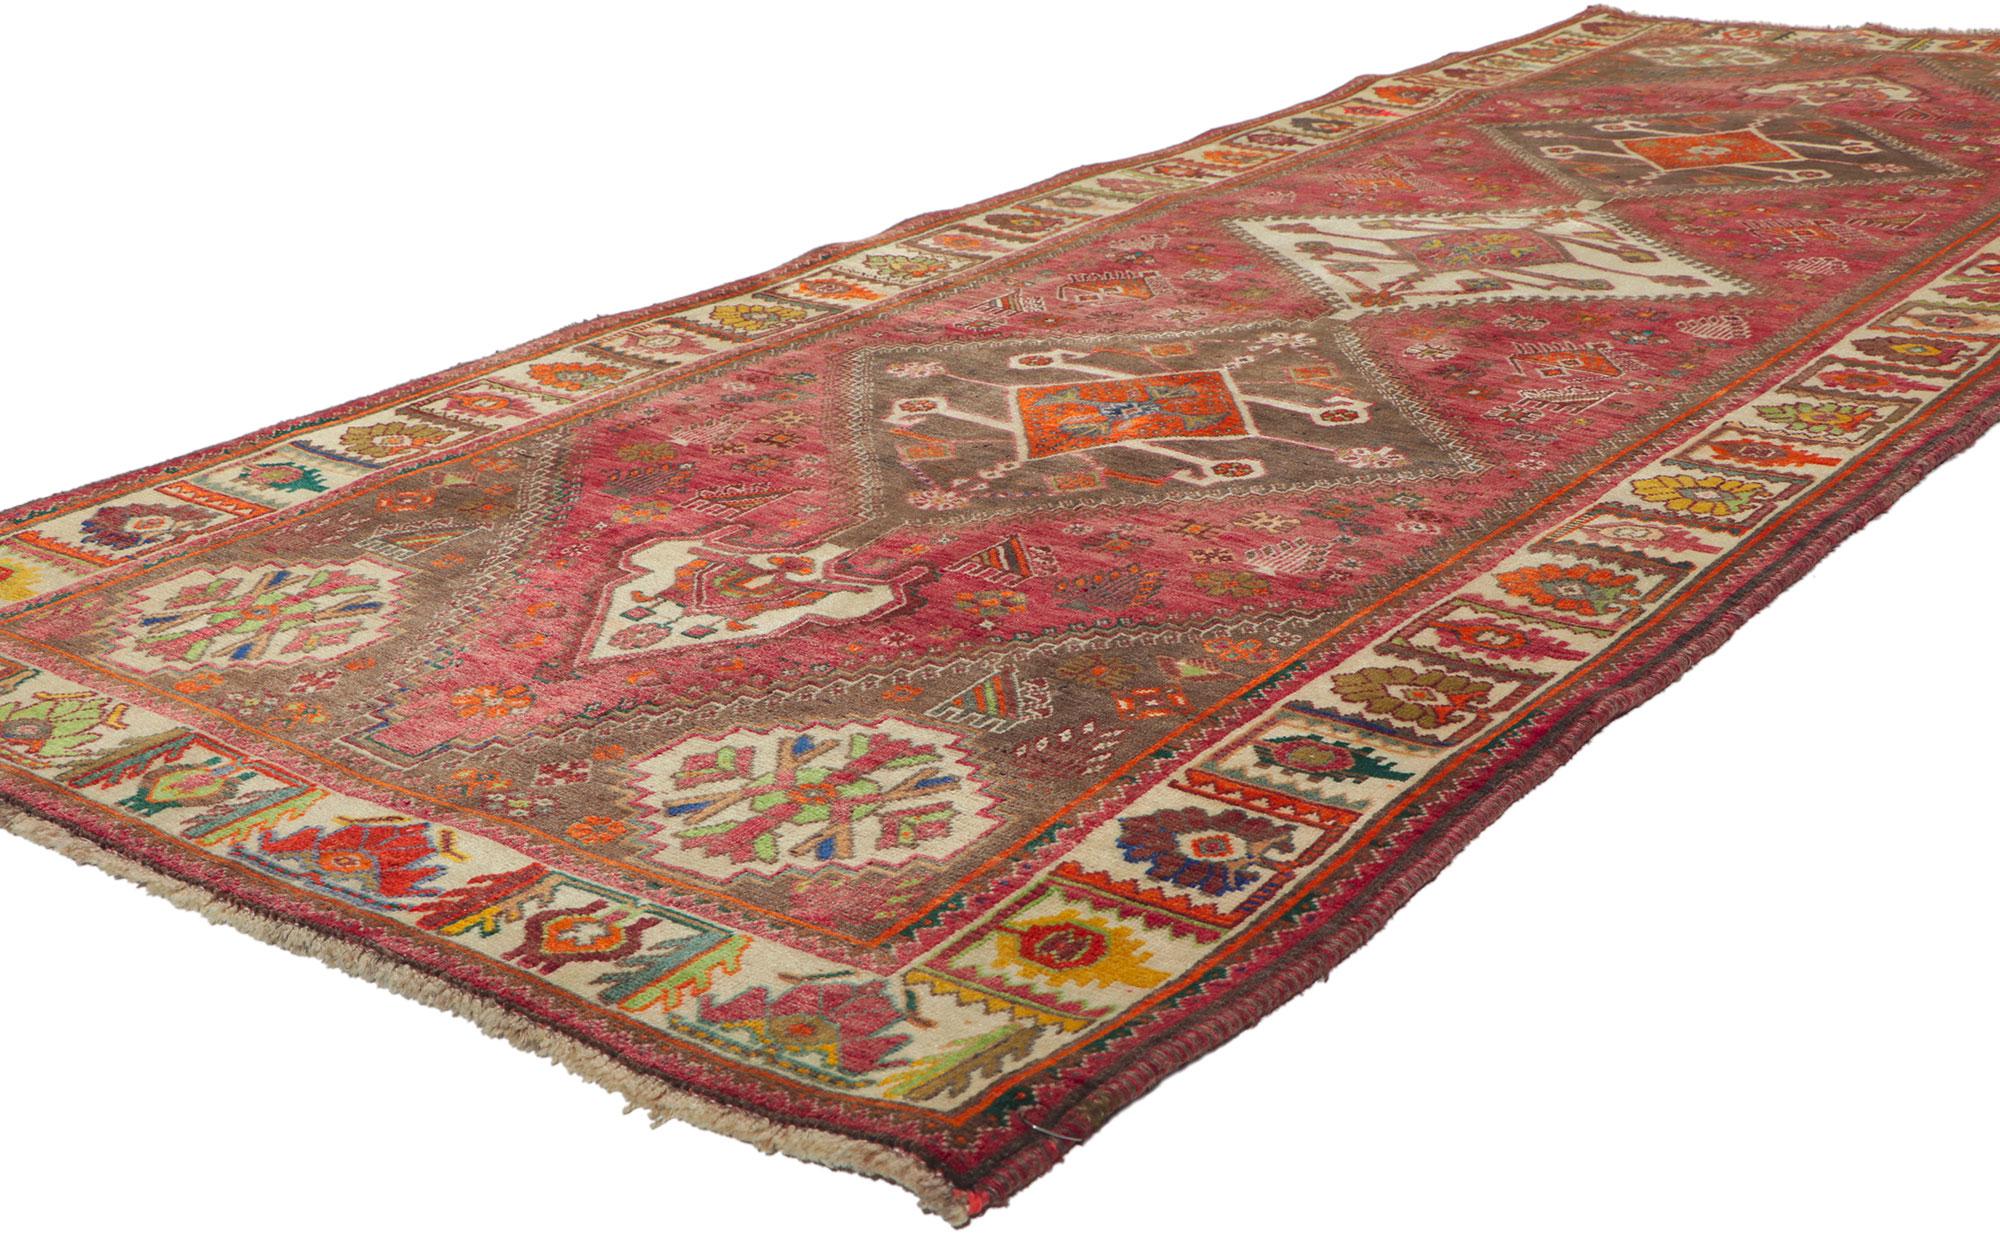 61052 vintage Persian Ghashghaei Rug, 03'08 x 09'09. Full of tiny details and a bold expressive design combined with tribal style, this hand-knotted wool vintage Persian Ghashghaei runner is a captivating vision of woven beauty. The abrashed red